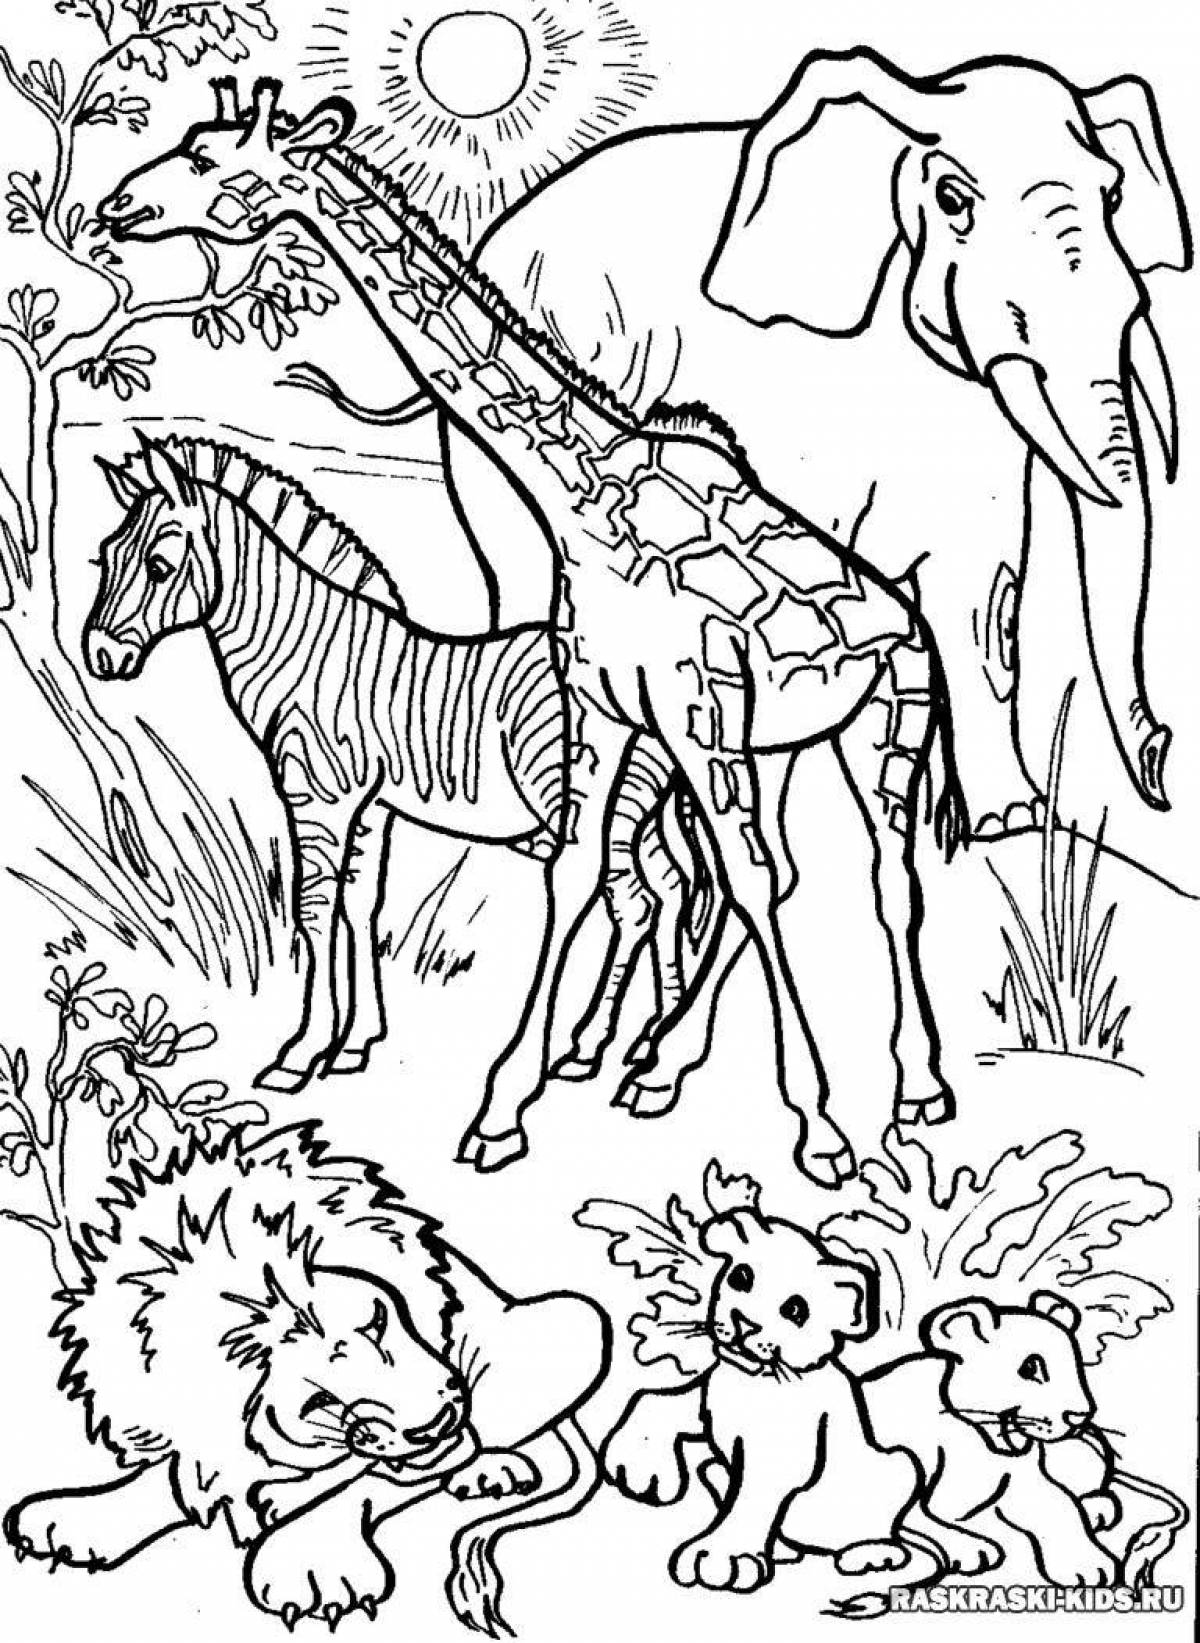 Colorful african animals coloring page for 6-7 year olds